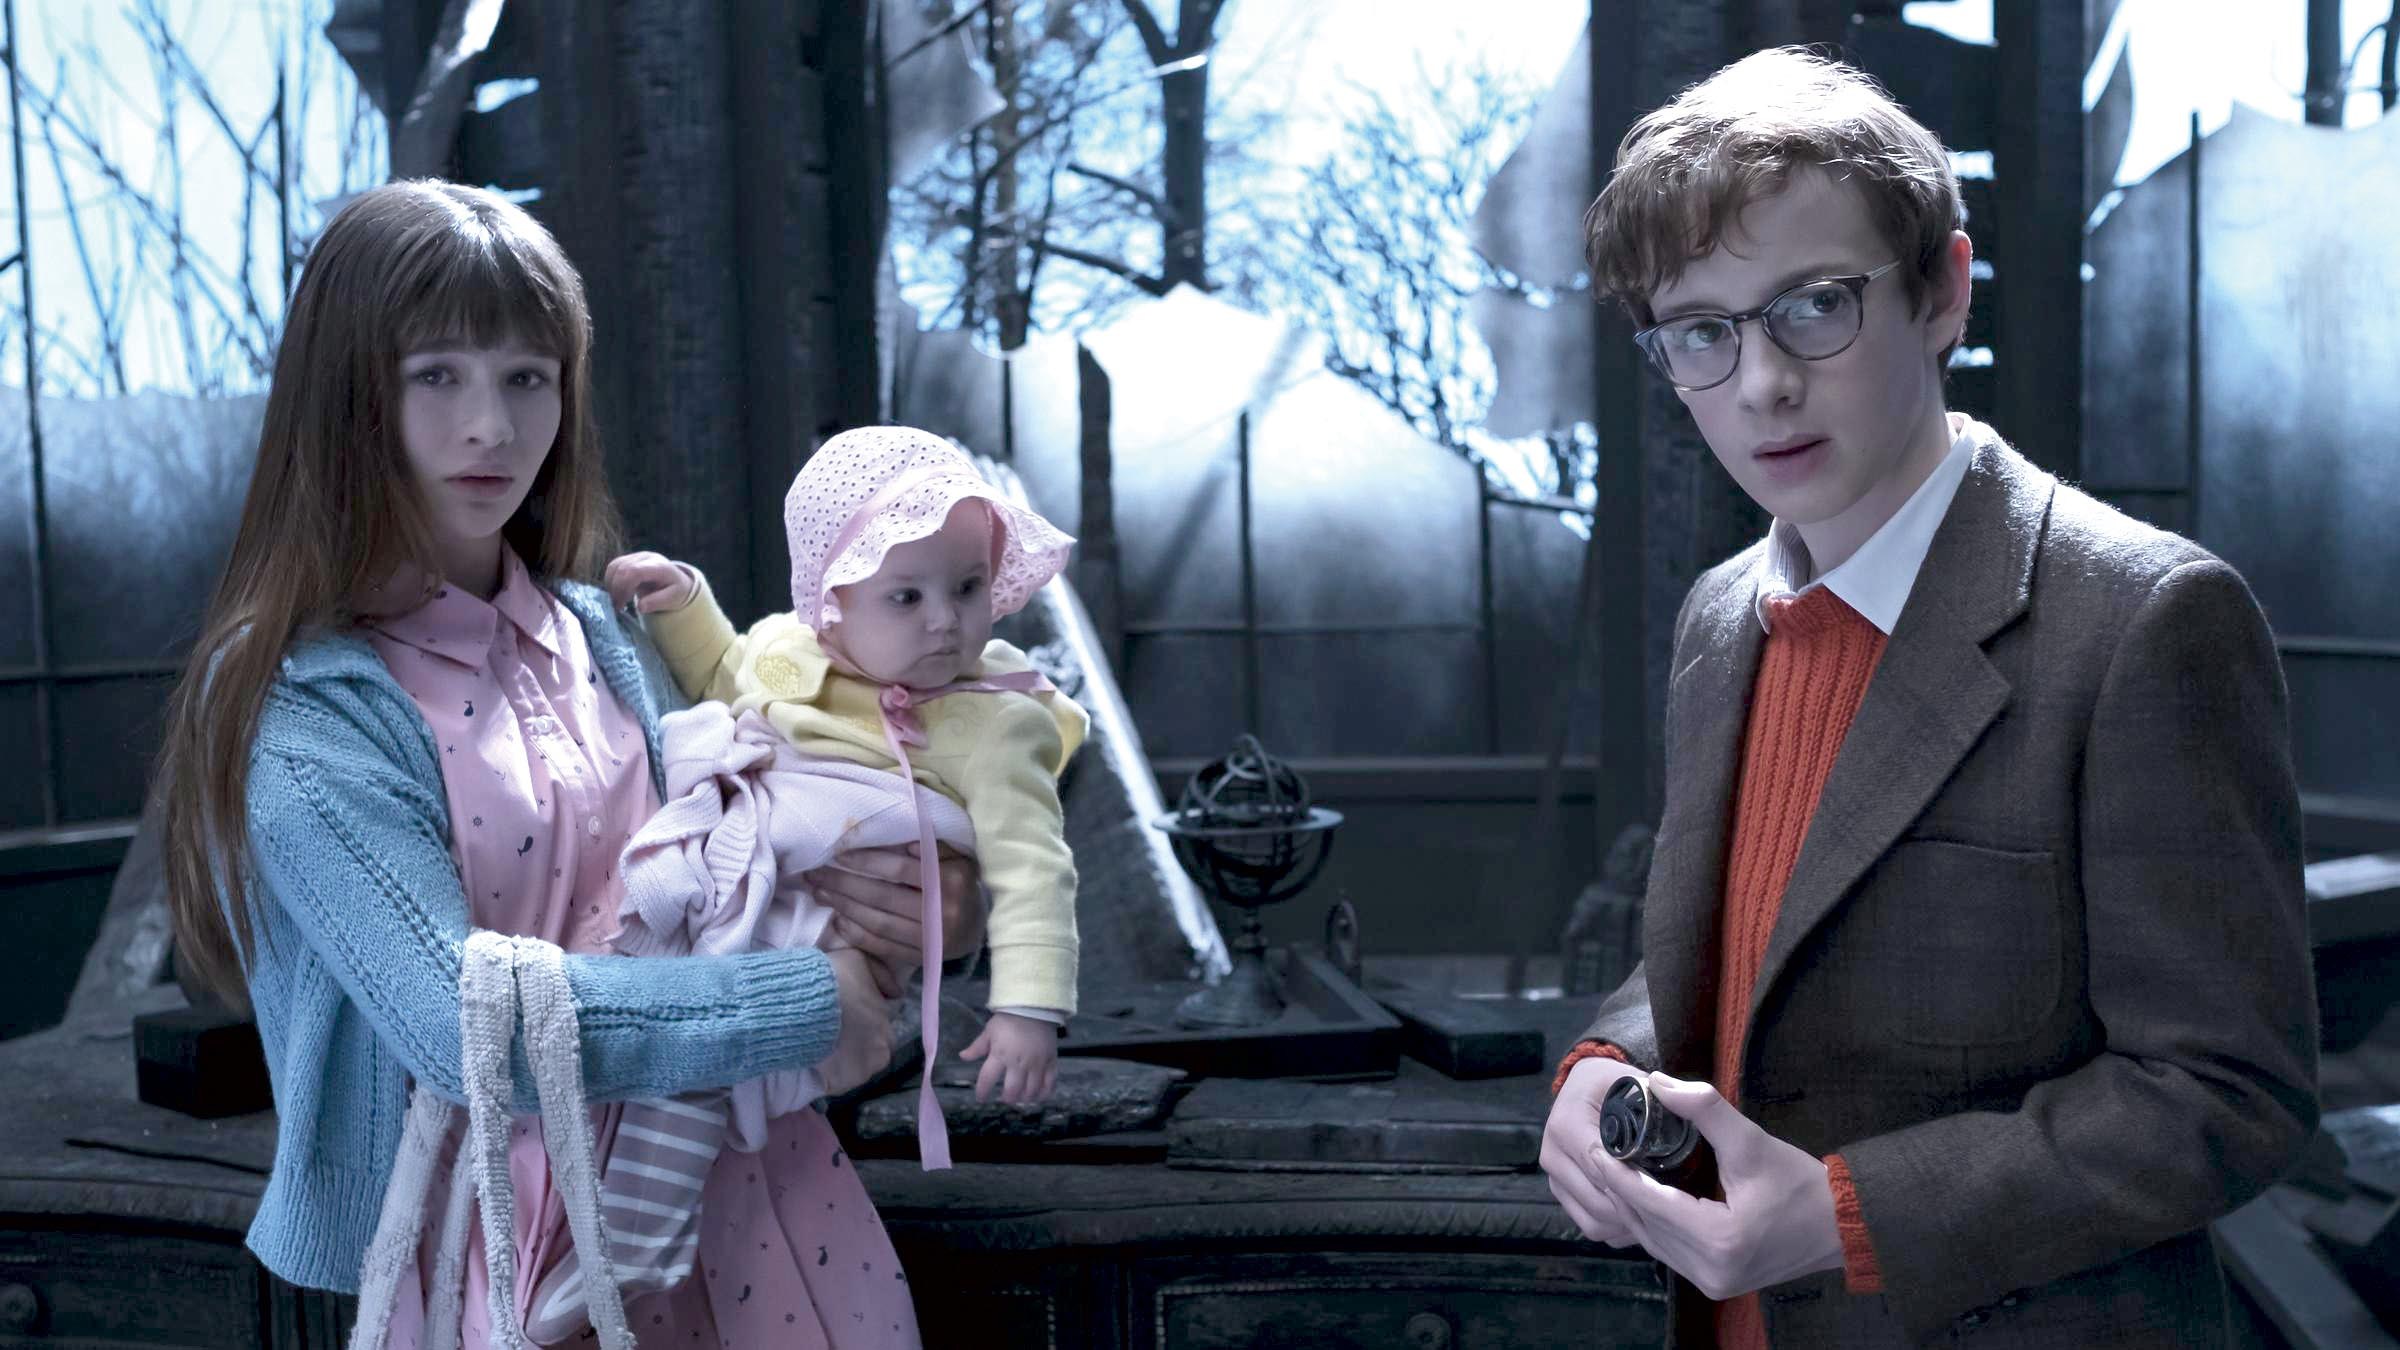 Lemony Snicket’s famous work is reinvented through TV The Peak